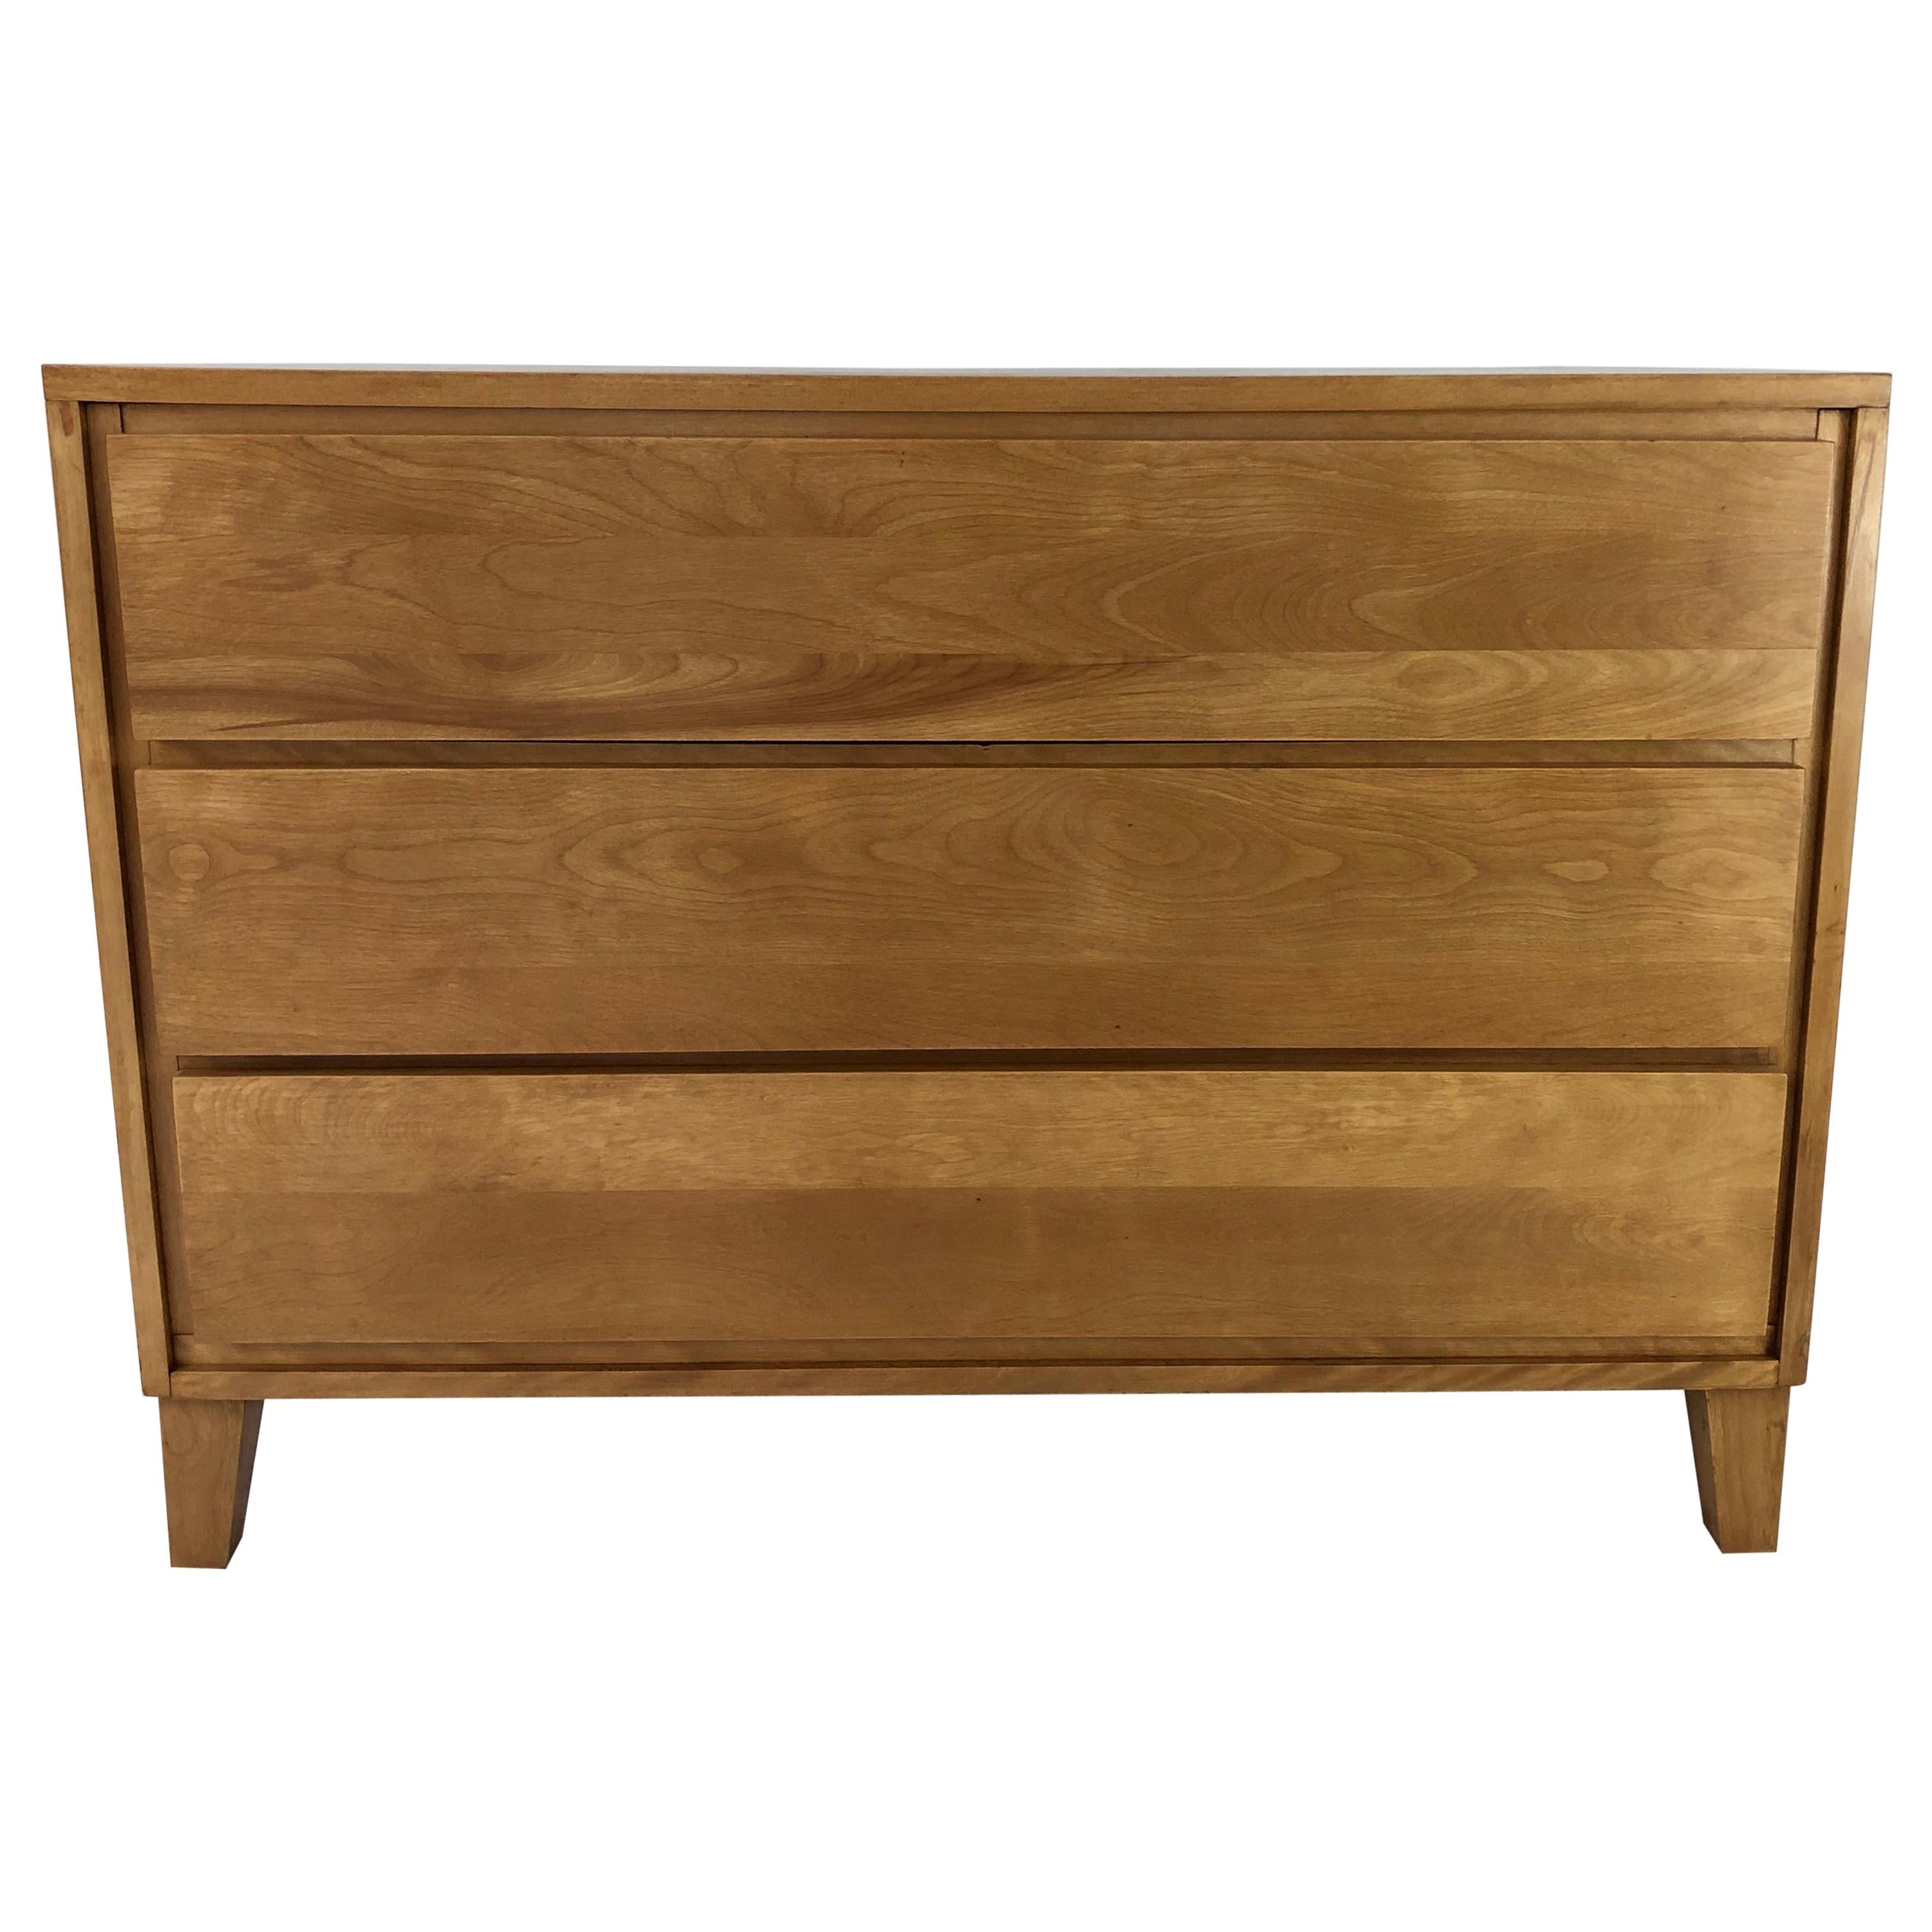 A sleek Mid-Century Modern period chest of drawers, designed by Russel Wright and produced as part of the American Modern line by Conant Ball. The chest is made of solid birch and has three spacious, long handle less drawers. (There is a convenient